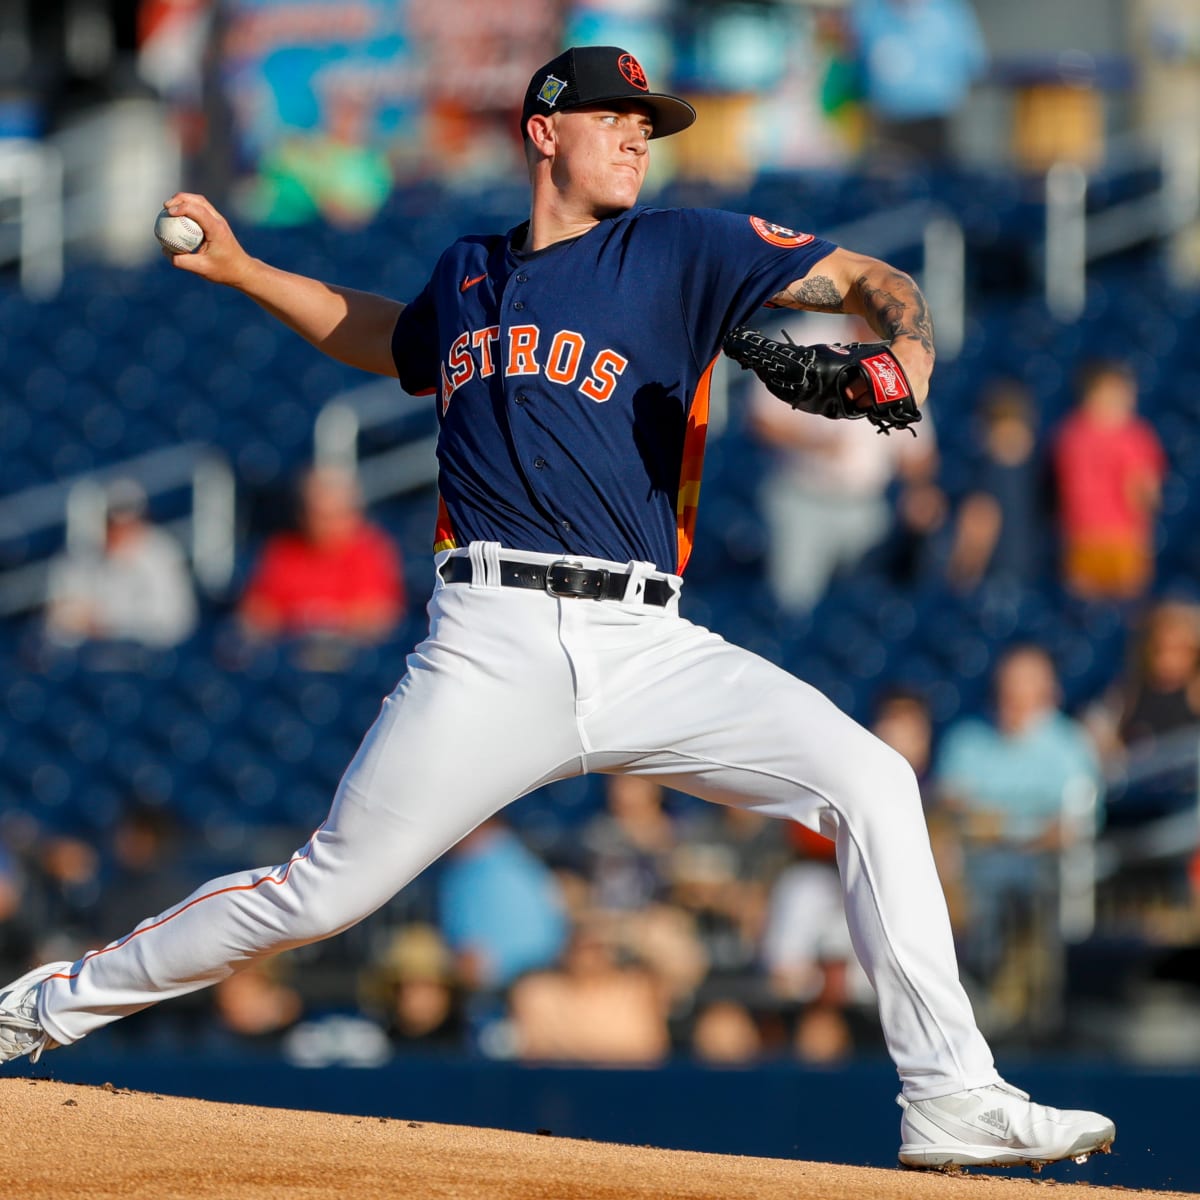 Astros rookie Hunter Brown shines in strong outing at Yankee